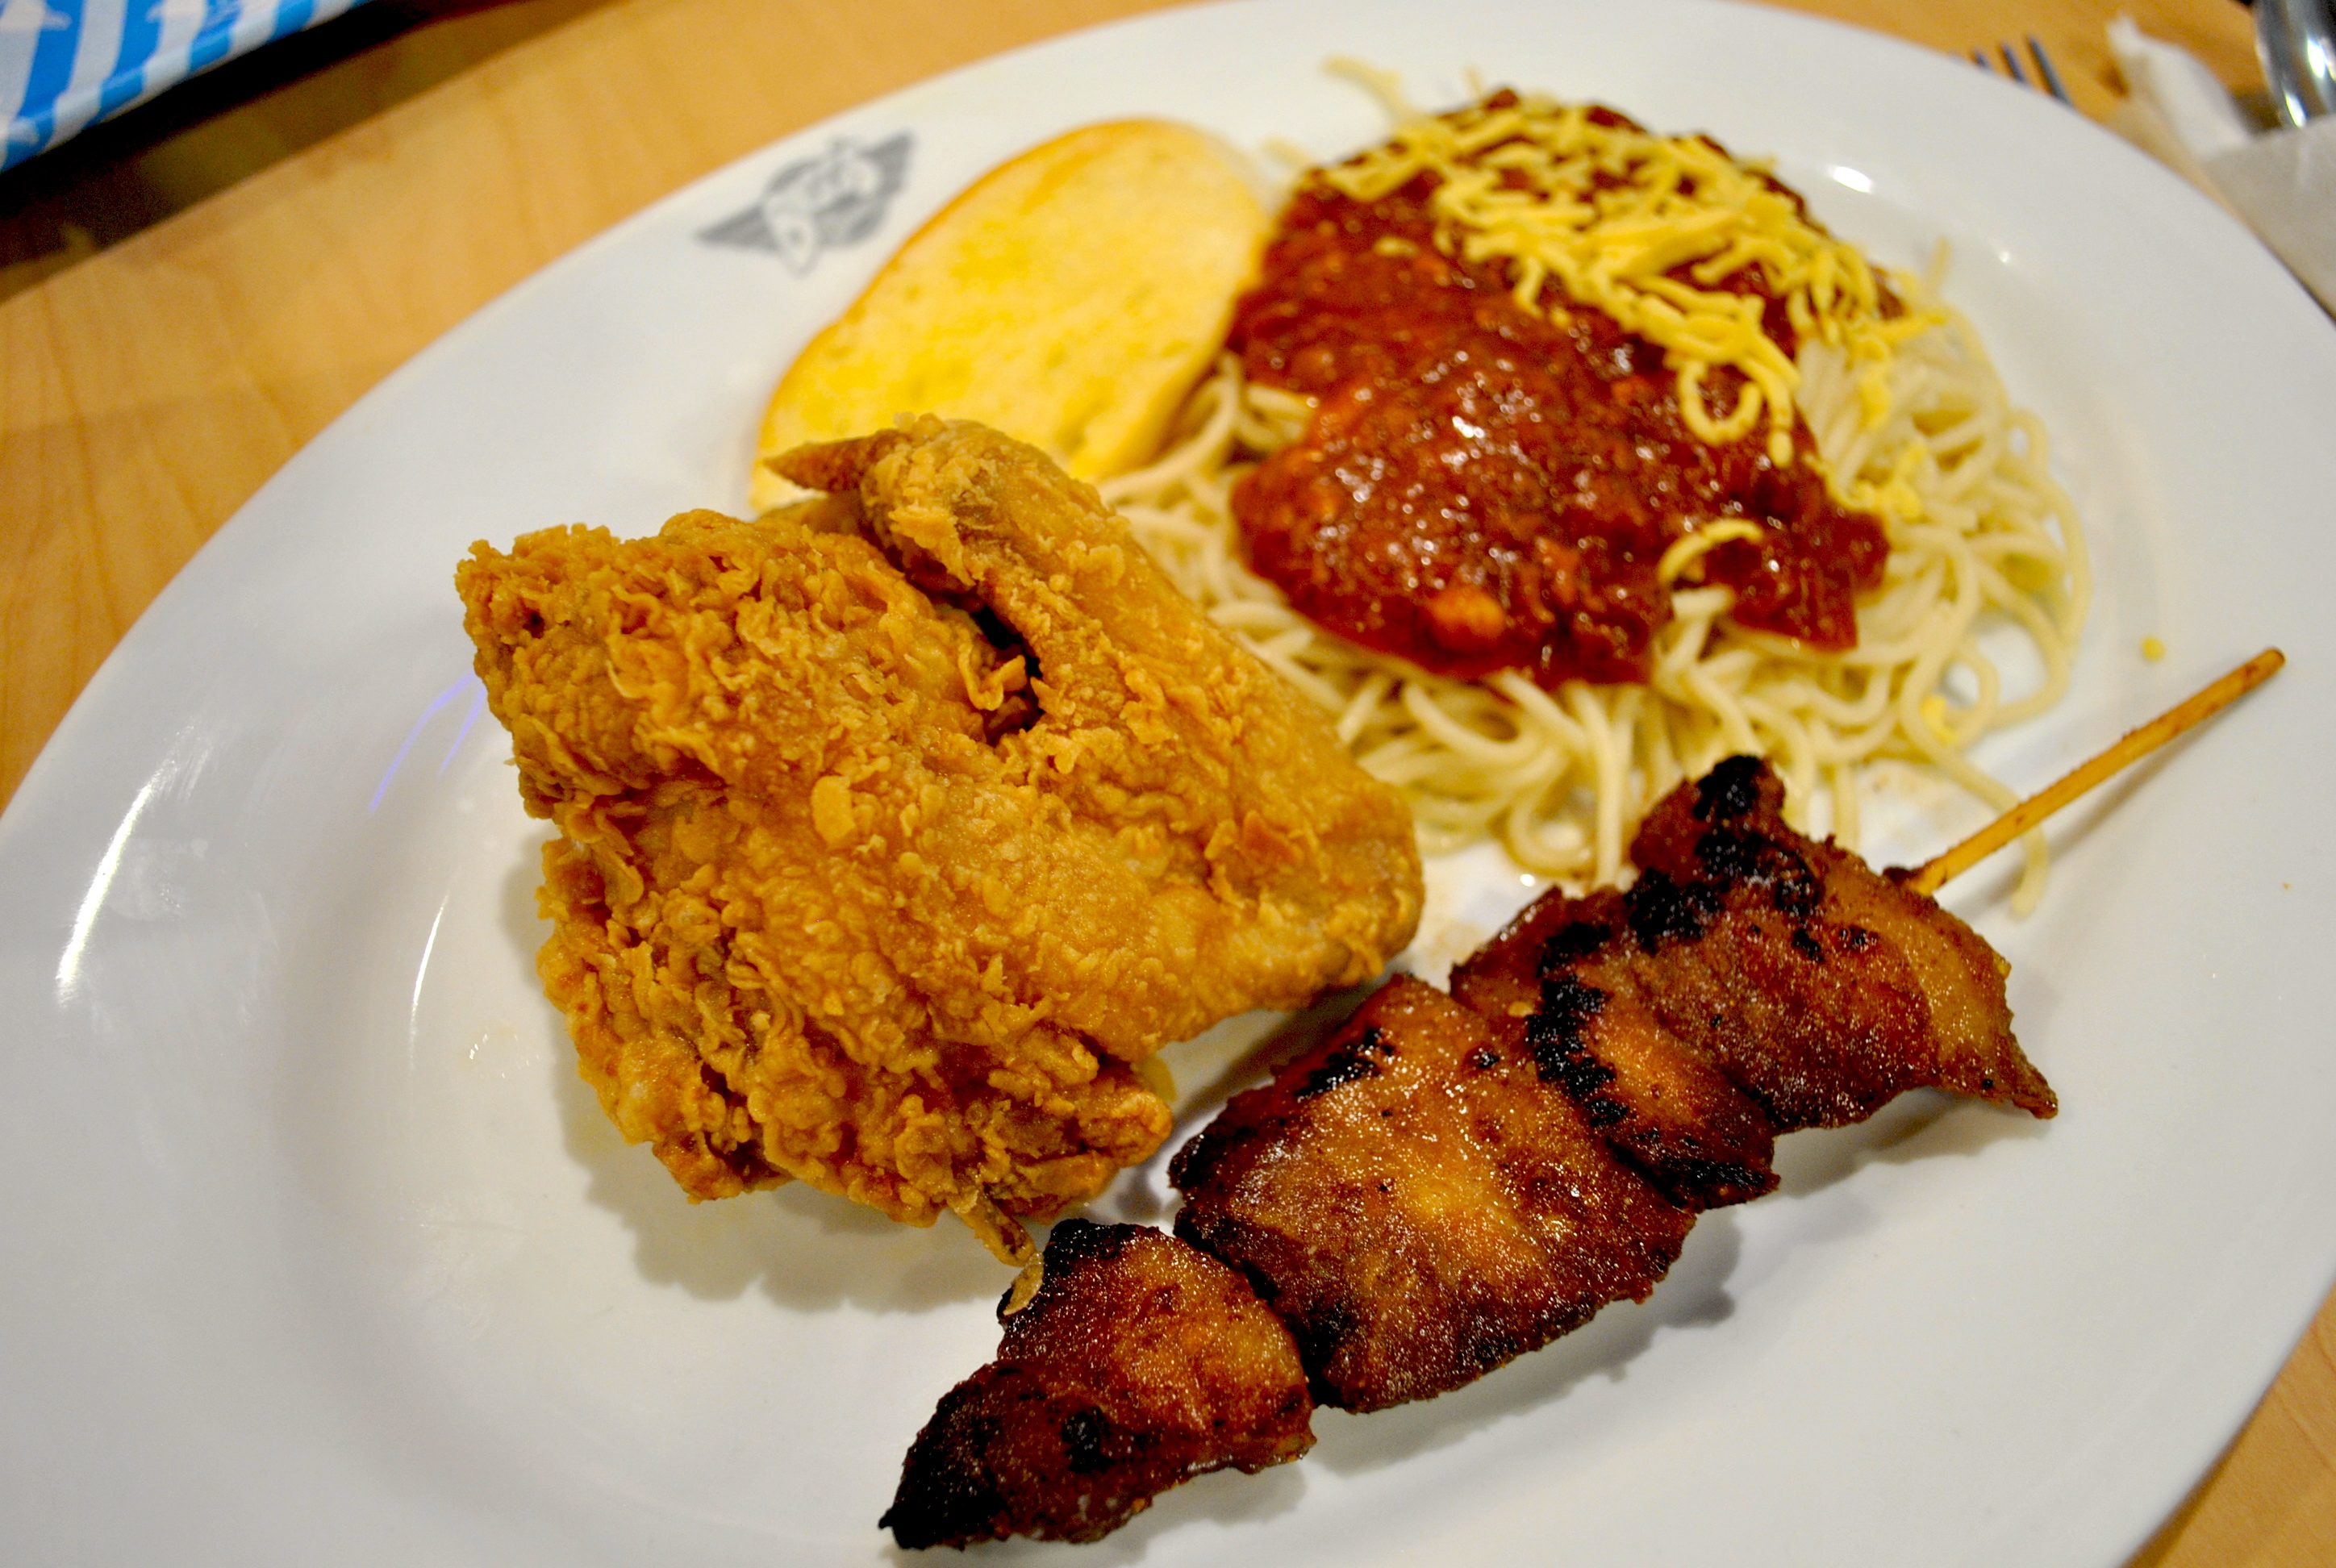 BIGG'S DEAL. For P277, you can get Bigg's fried chicken, spaghetti, and kebab in one plate. Photo by Steph Arnaldo/Rappler 